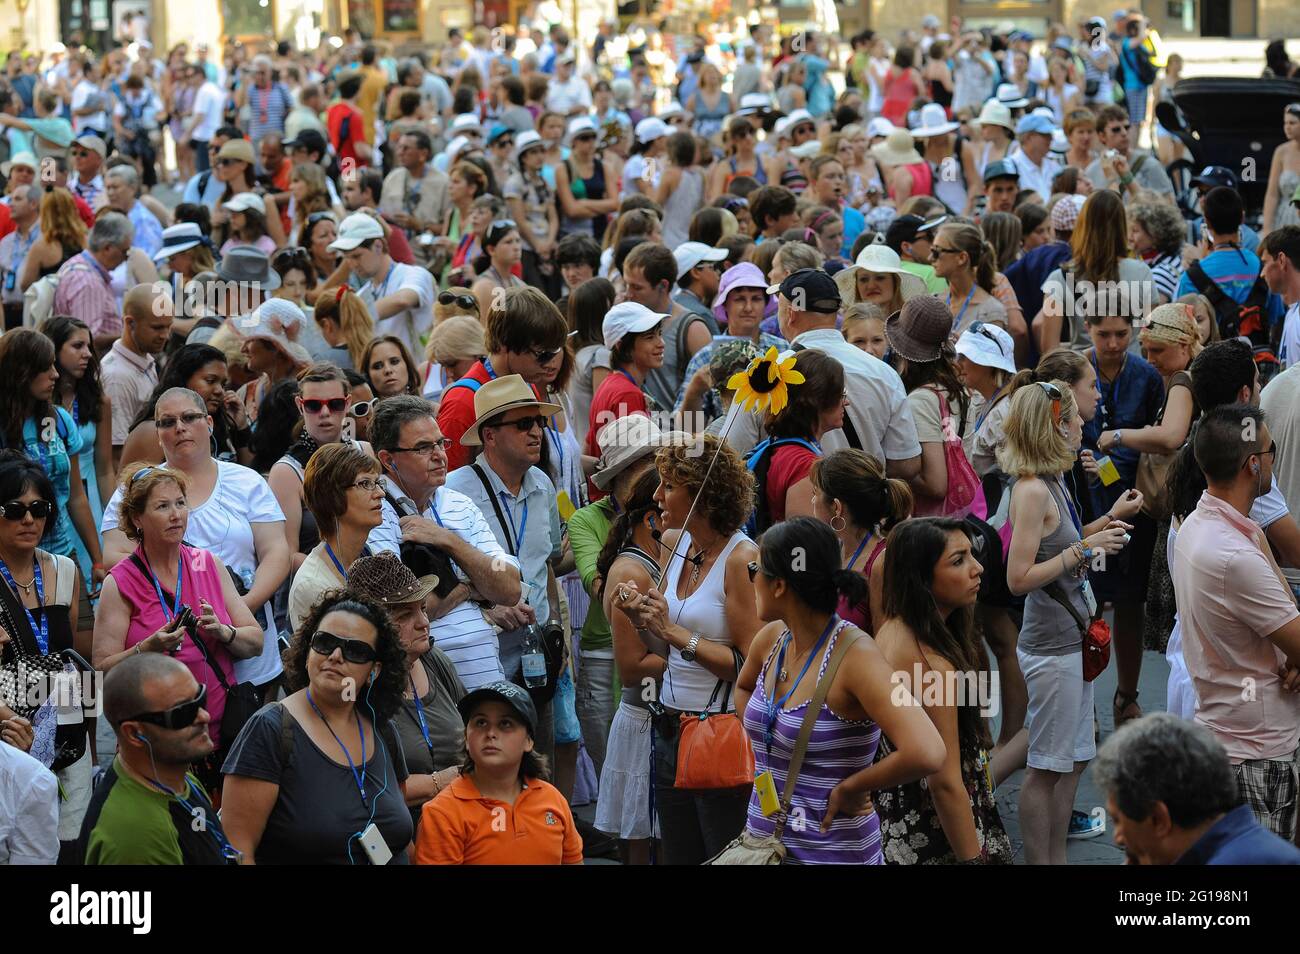 By mid-July, near the peak of the summer high season, Piazza della Signoria, the historic heart of Florence, Tuscany, Italy, is packed throughout the day with visitors from all over the world.  This image, captured from the Loggia dei Lanzi outdoor sculpture gallery, shows hundreds of people listening to tourist guides, taking photographs and marvelling at sights such as the Palazzo Vecchio, the city’s town hall and centre of civic power since it was founded in 1299. Stock Photo